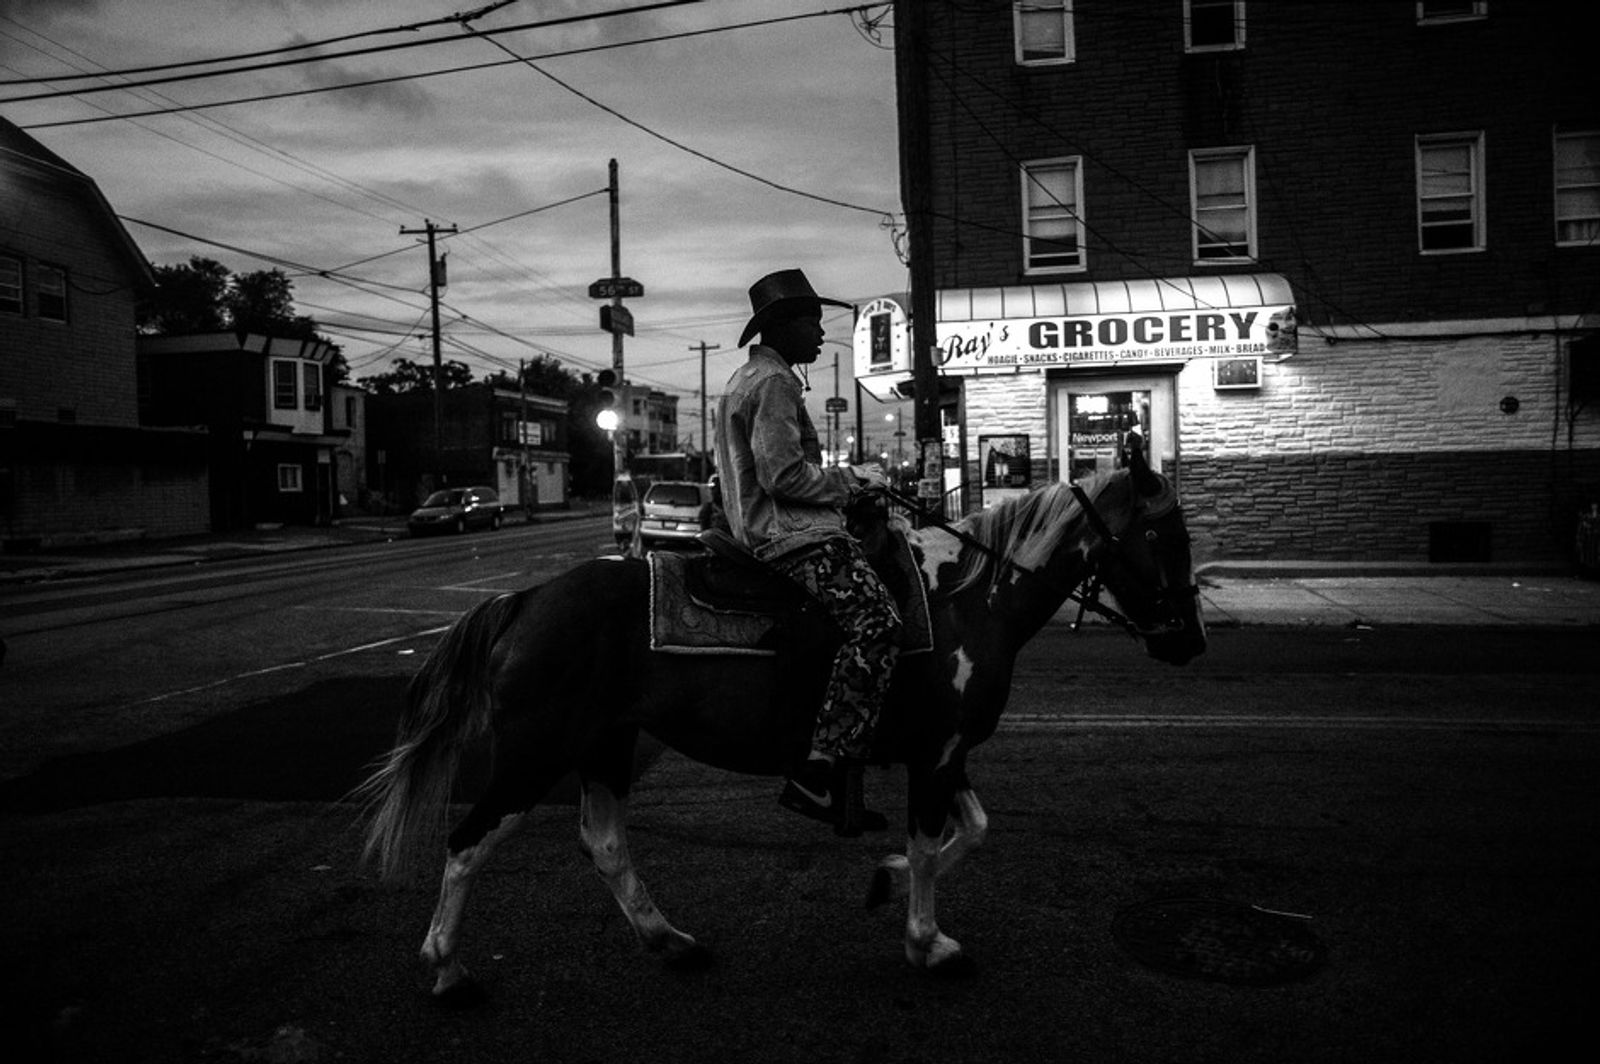 © Charles Mostoller - Image from the Philadelphia's Concrete Cowboys photography project